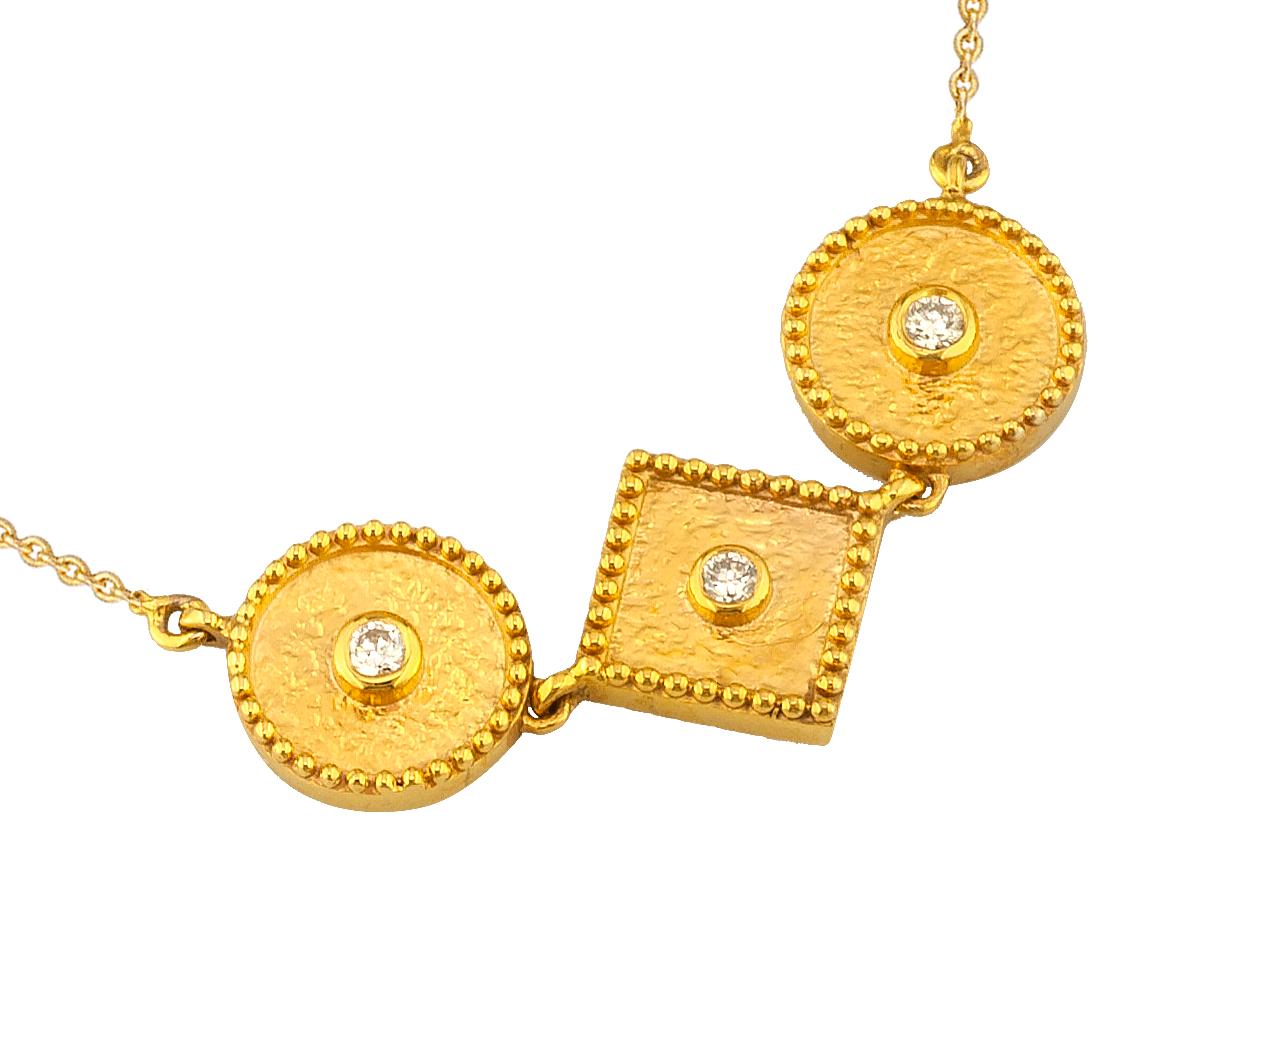 This S.Georgios necklace is 18 Karat yellow gold and microscopically decorated with hand-made bead granulation workmanship, and finished with a unique velvet background look. This beautiful geometric necklace feature 3 brilliant-cut White Diamonds,